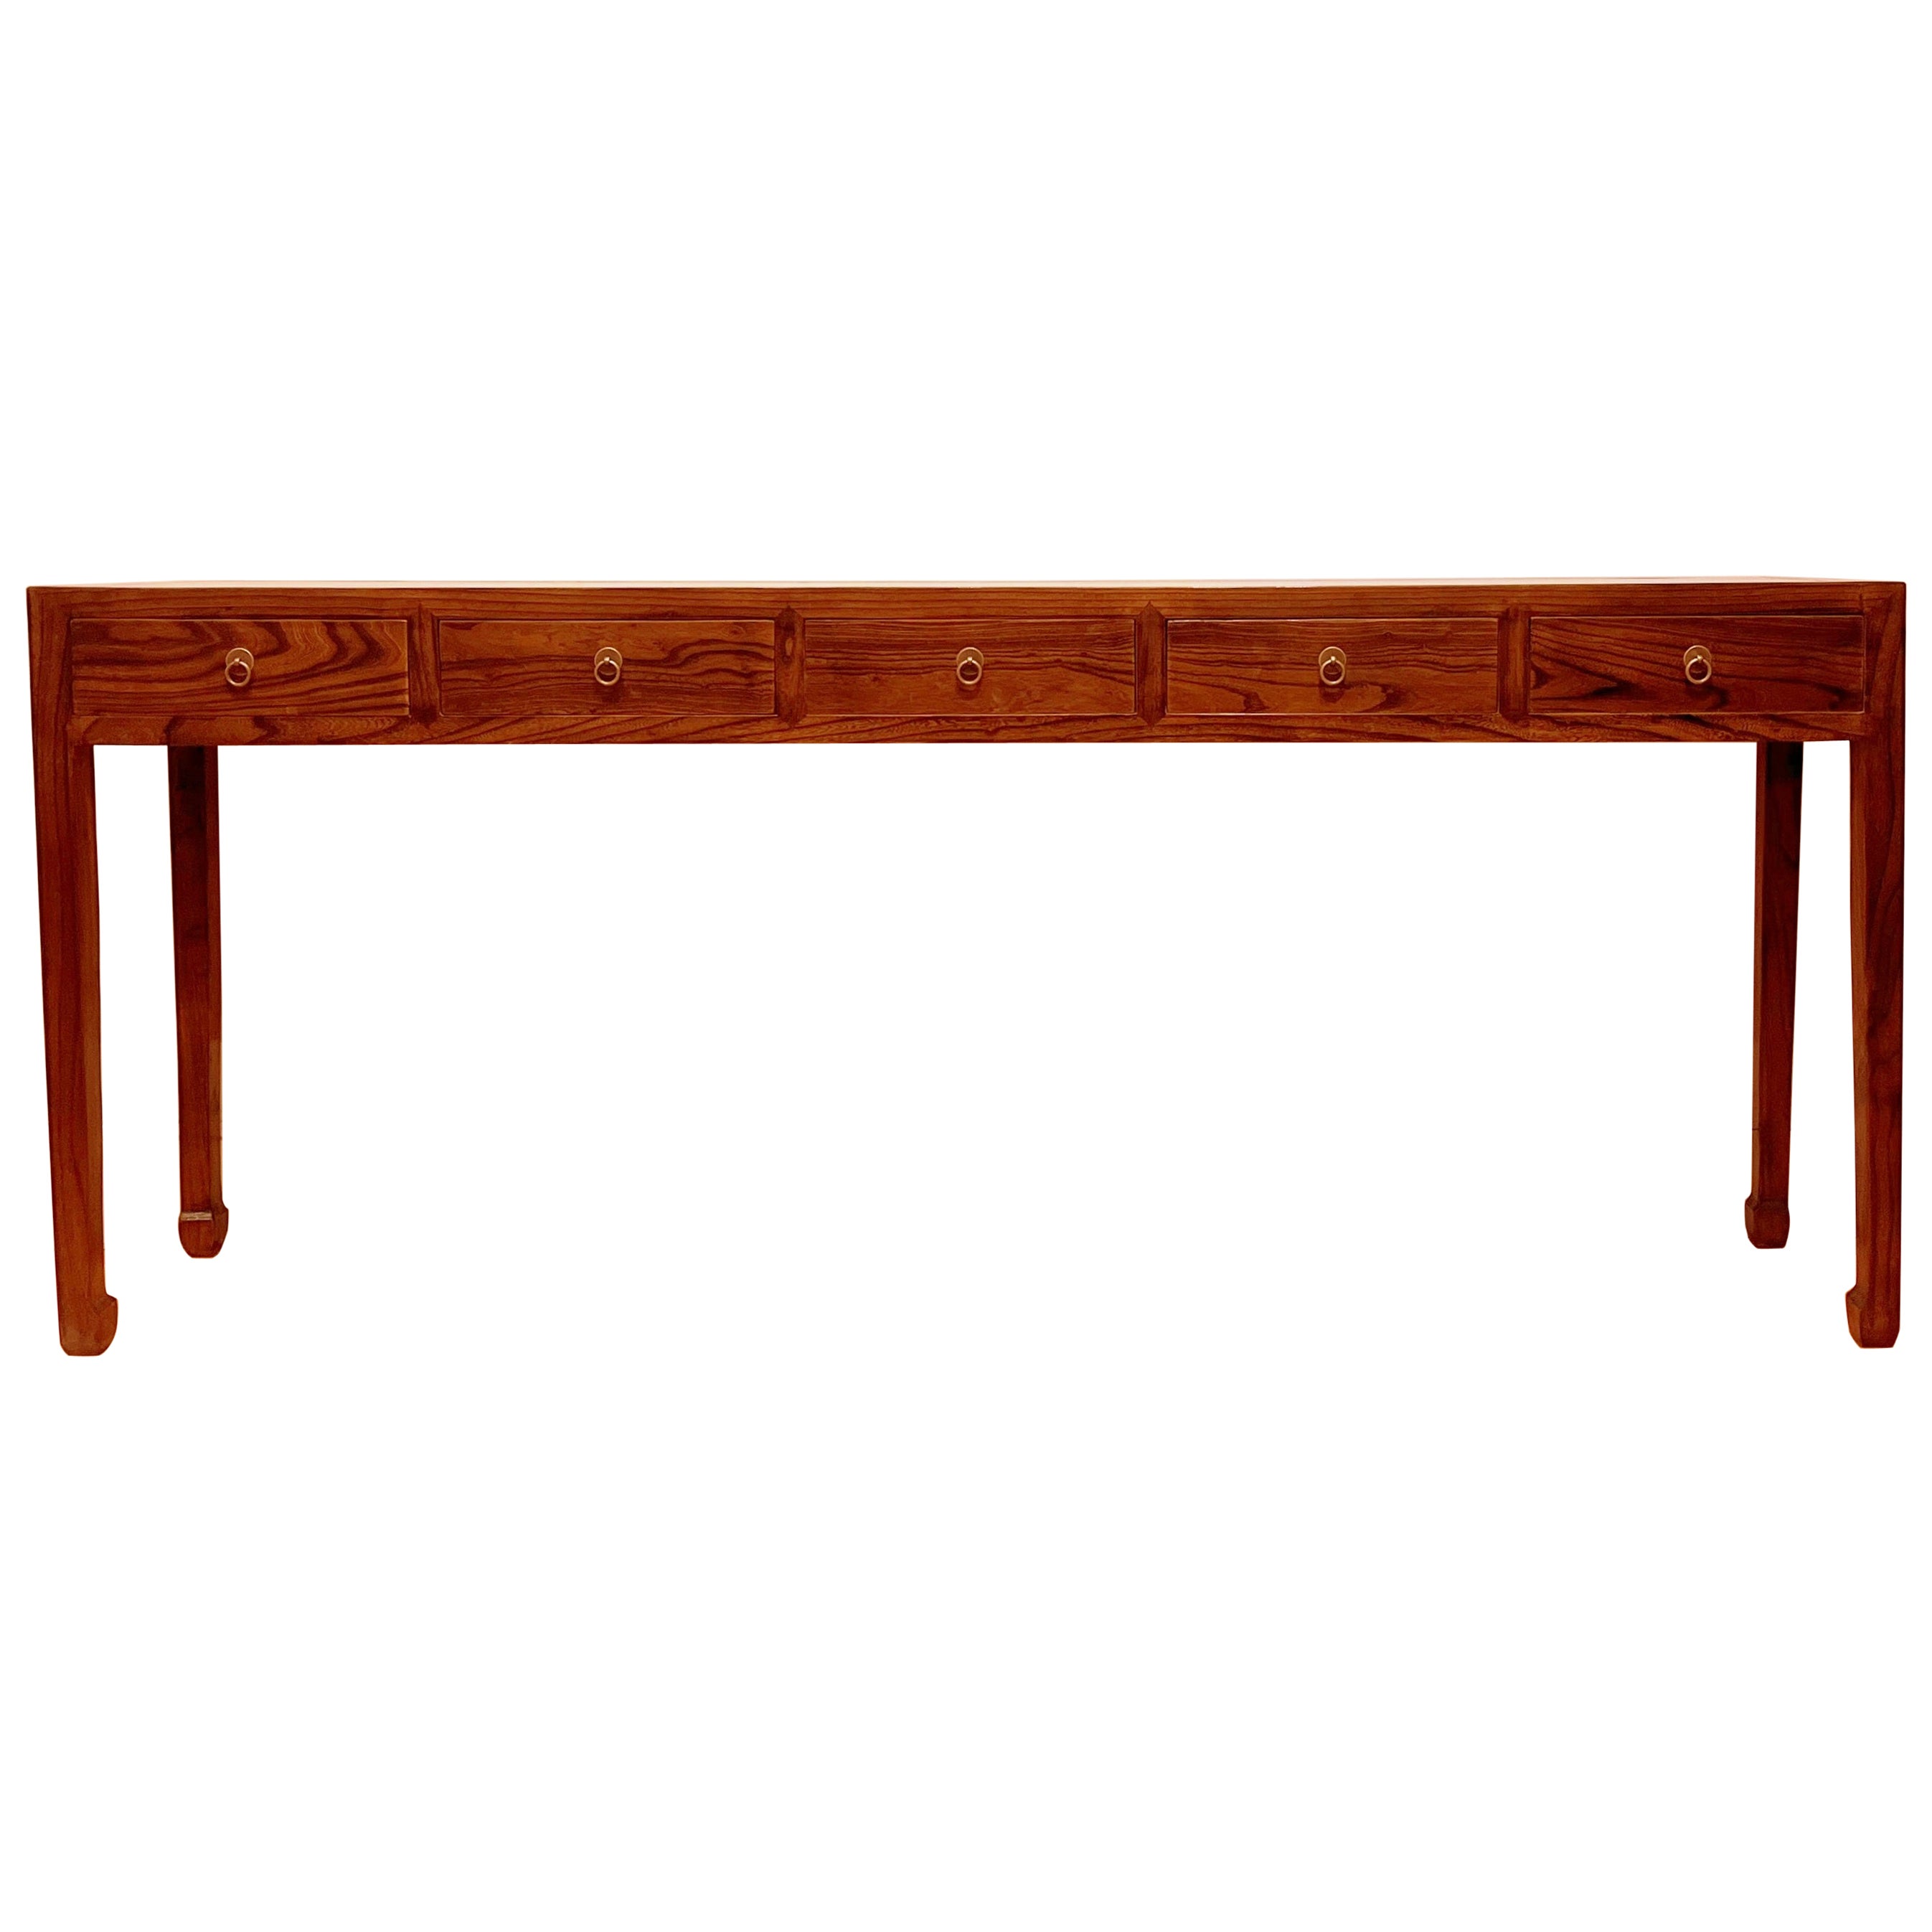 Fine Jumu Console Table with Drawers